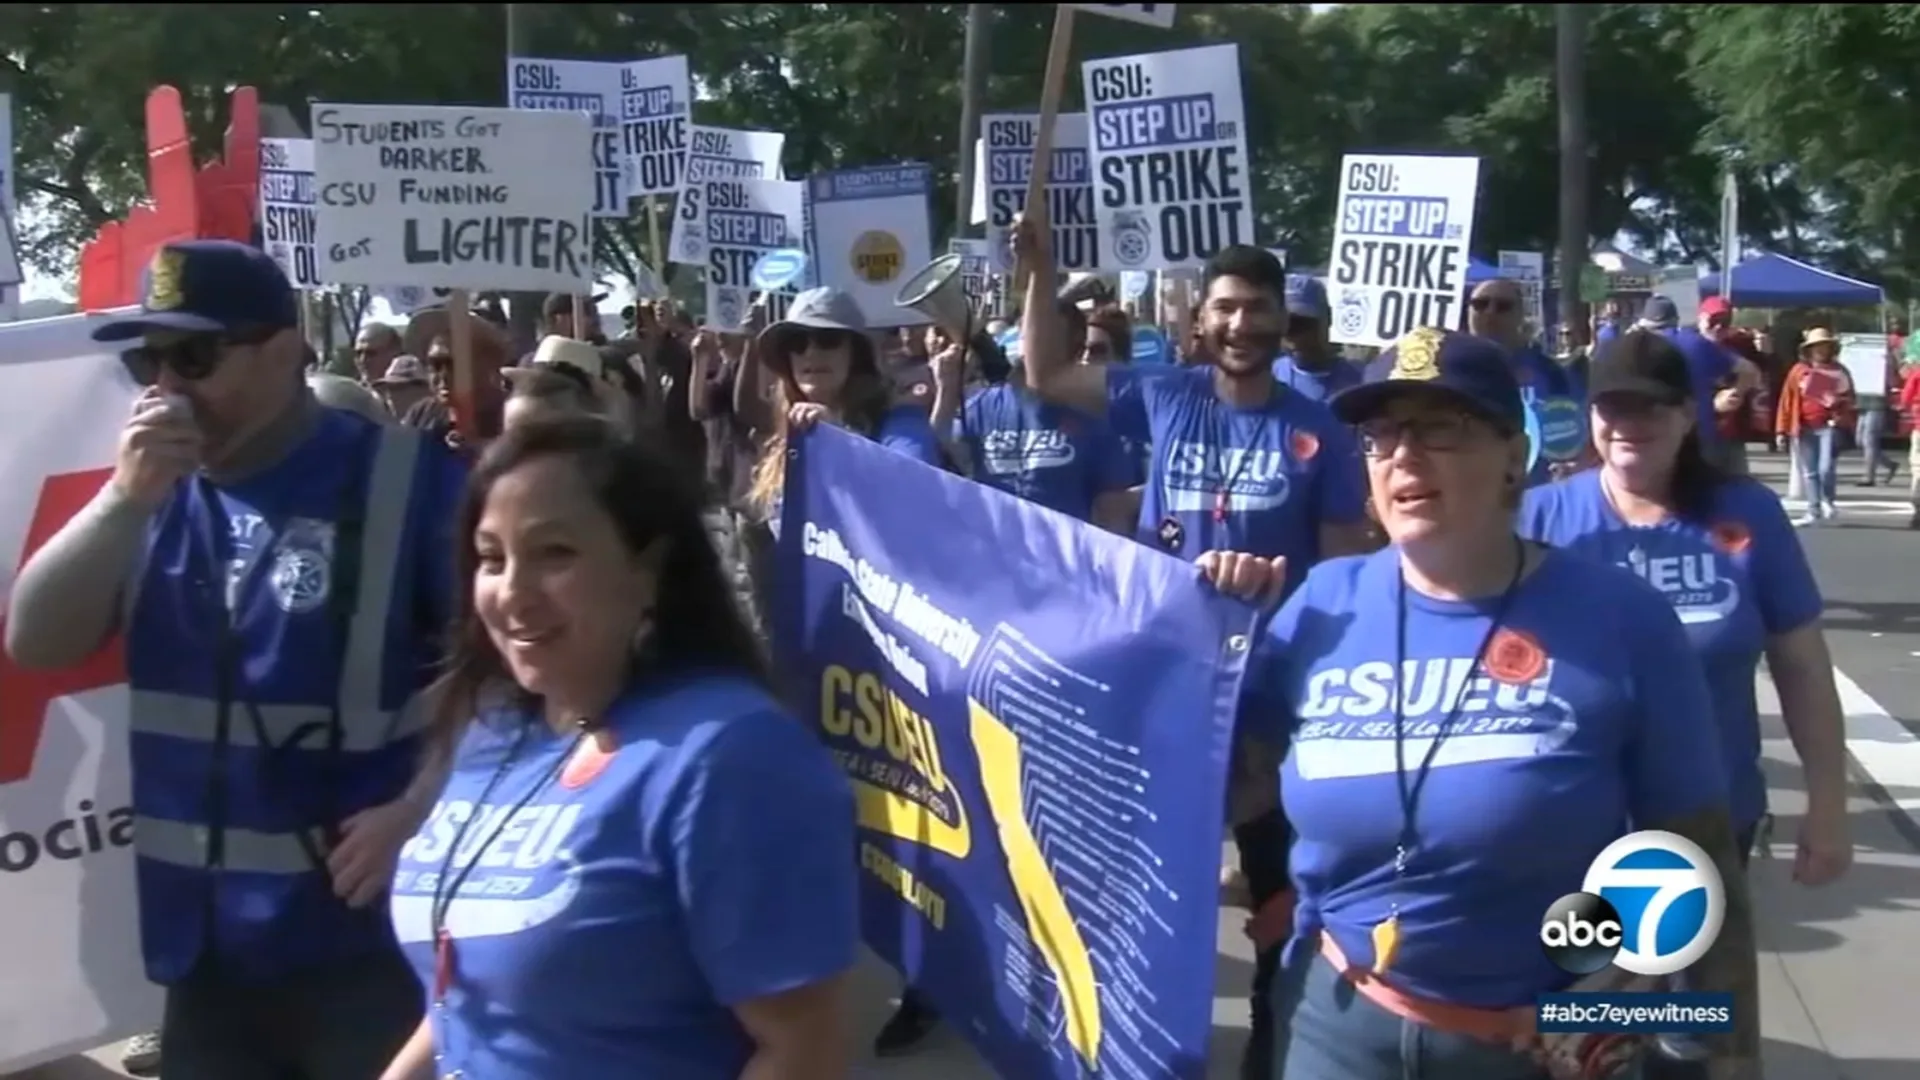 This Is Terrible!!  How Do Some Students Afford To Get A Proper Education???

Cal State trustees approve tuition hike plan - 6% per year, for the next 5 years https://abc7.com/california-state-university-csu-tuition-hike-costs/13778947/

#CSU  #CalState  #Education  #StudentLoans